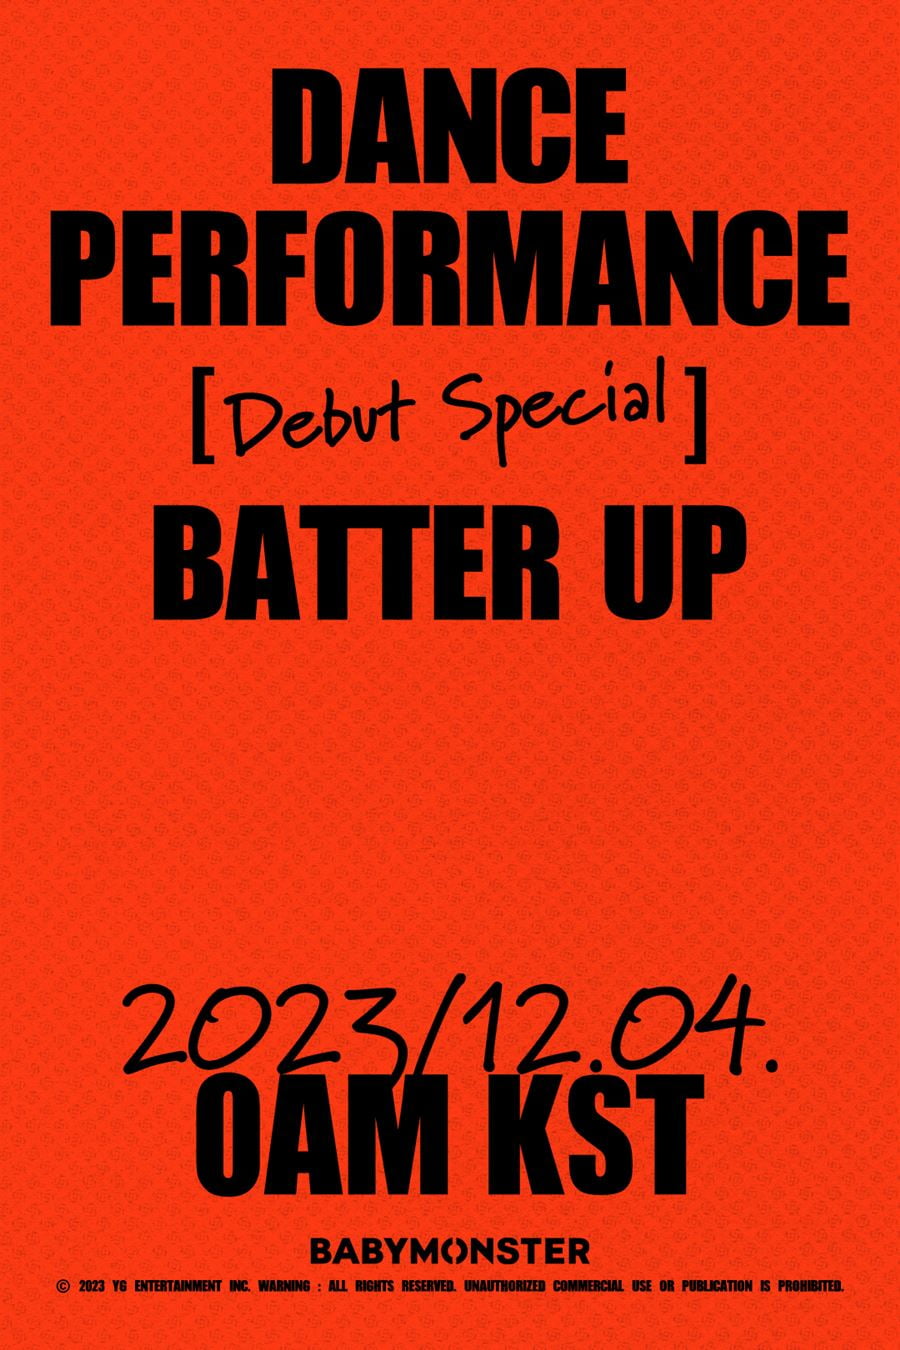 YG Baby Monster, ‘BATTER UP’ dance performance unveiled for the first time on the 4th